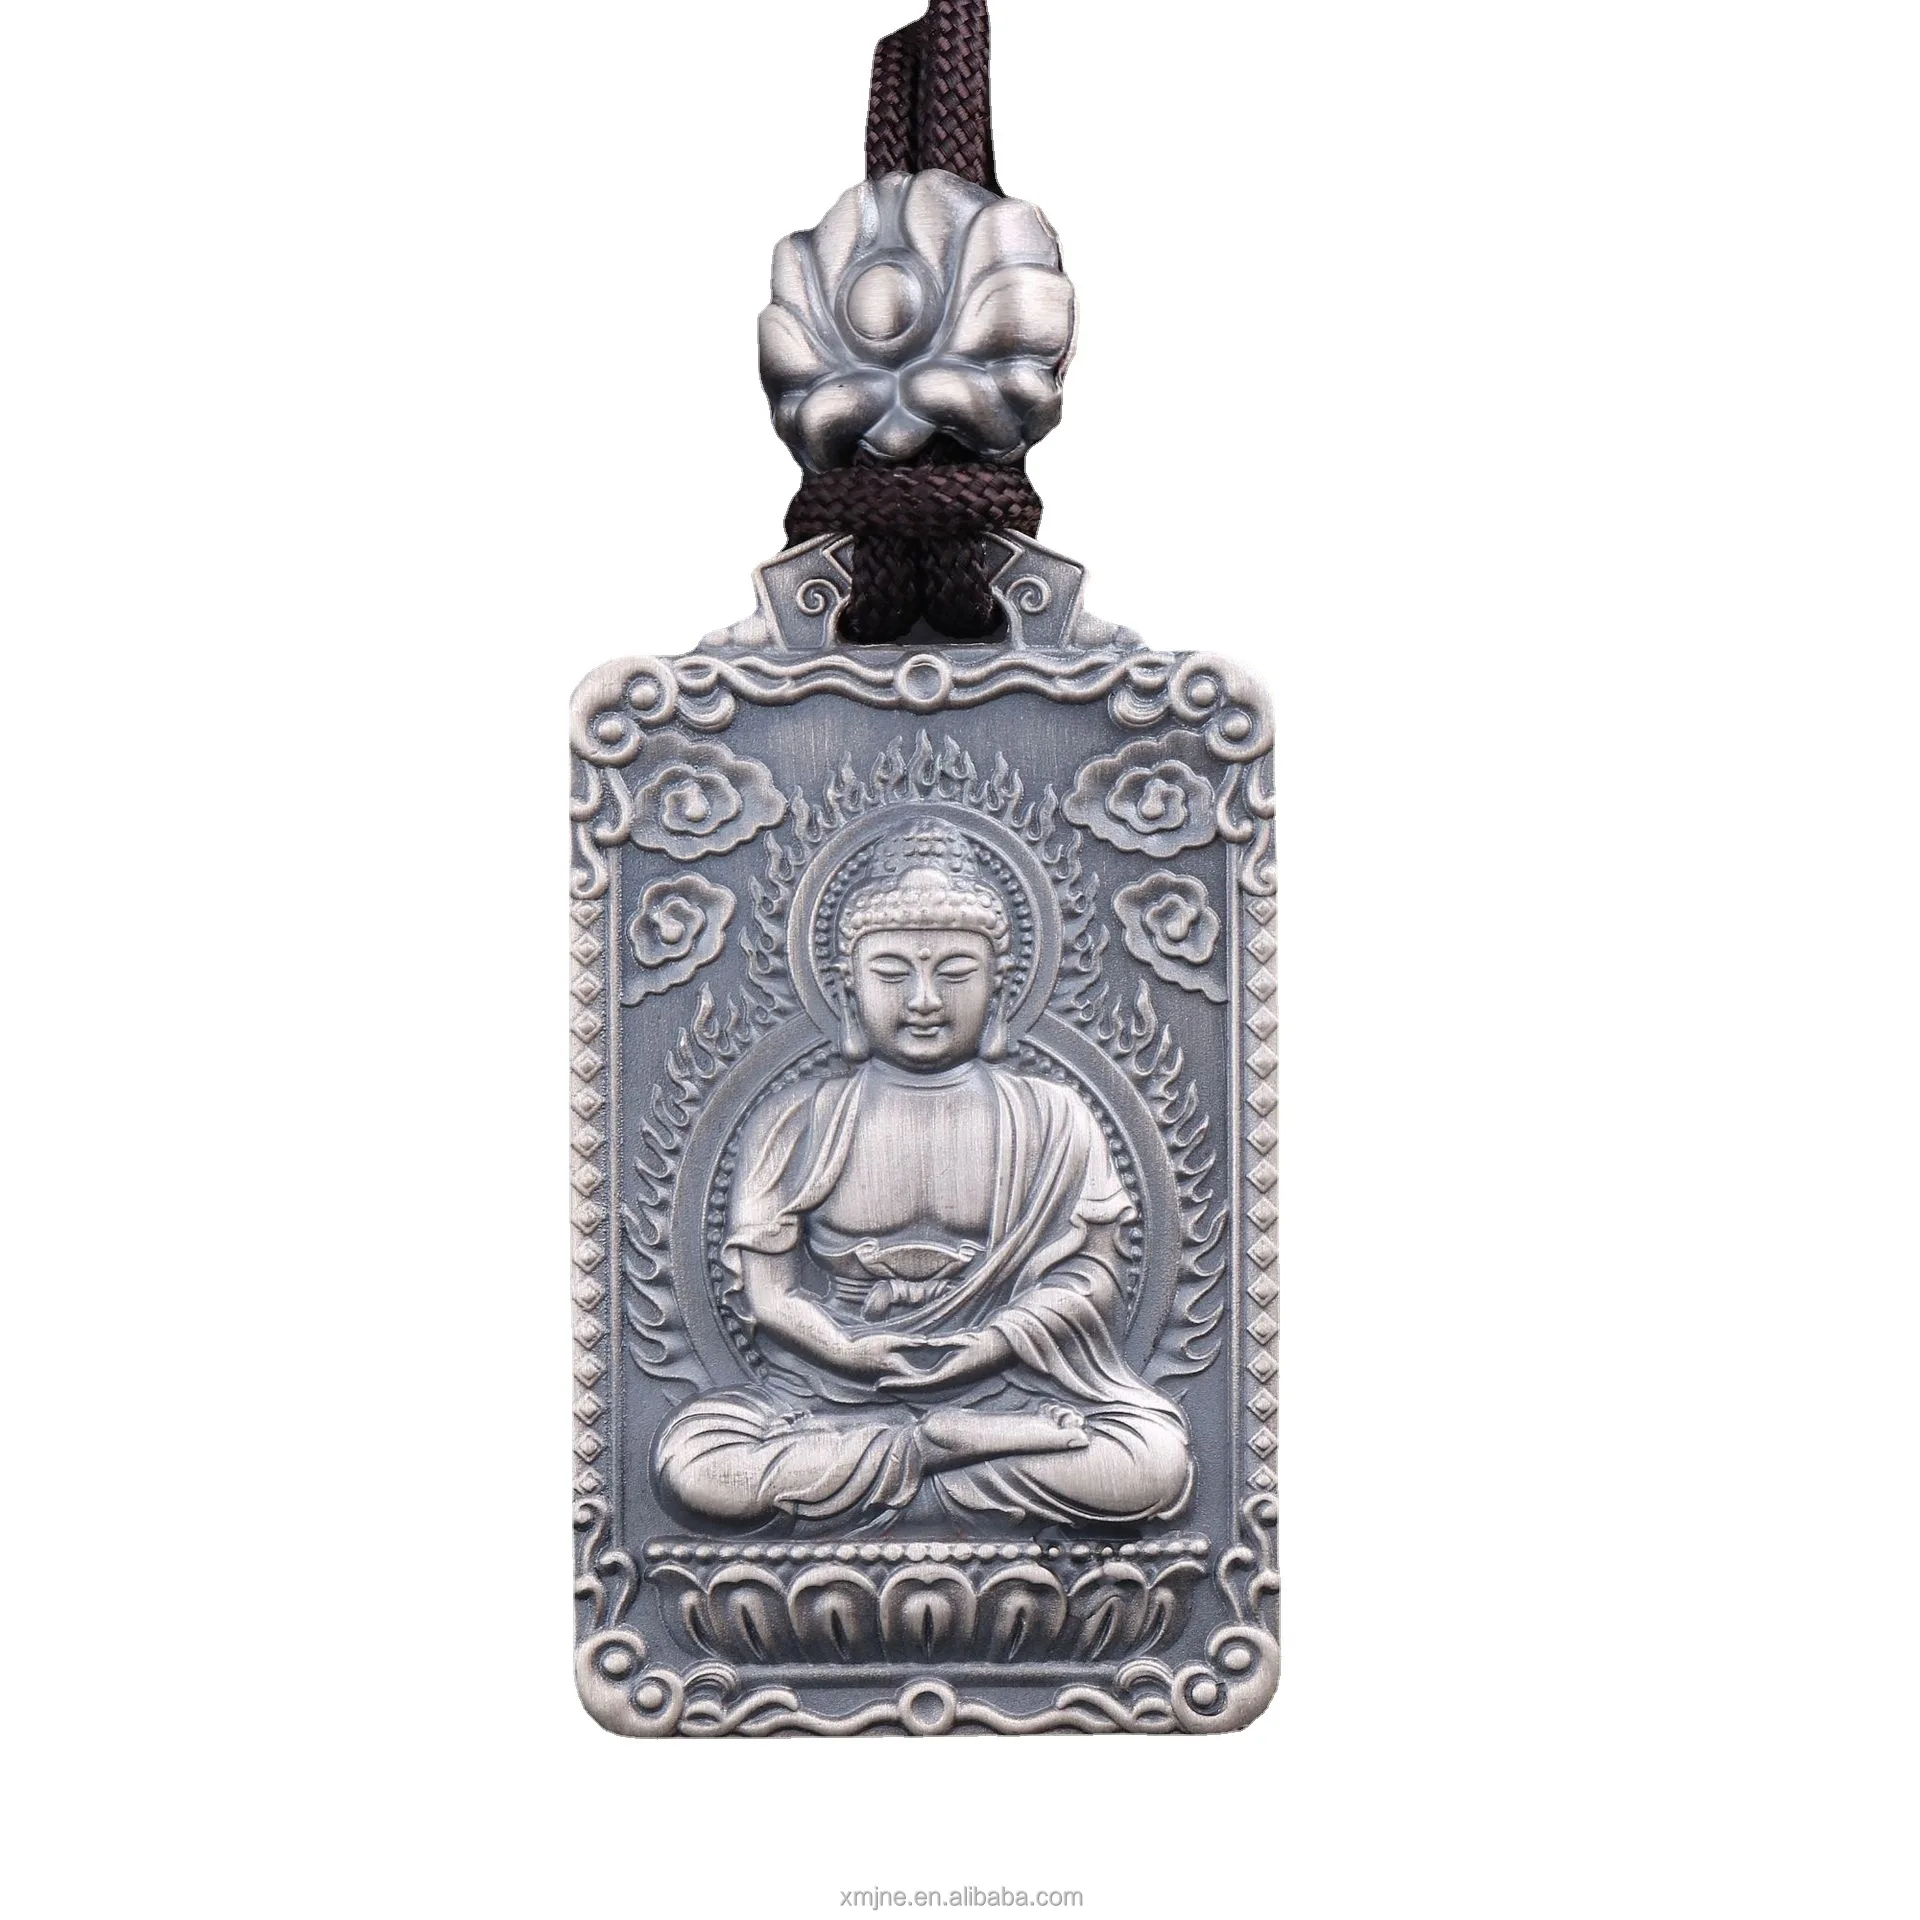 

Certified S999 Buddha Sterling Silver Pendant For The Year Of The Tiger 12 Chinese Zodiac Men's Rotating Eight Guardian Charm